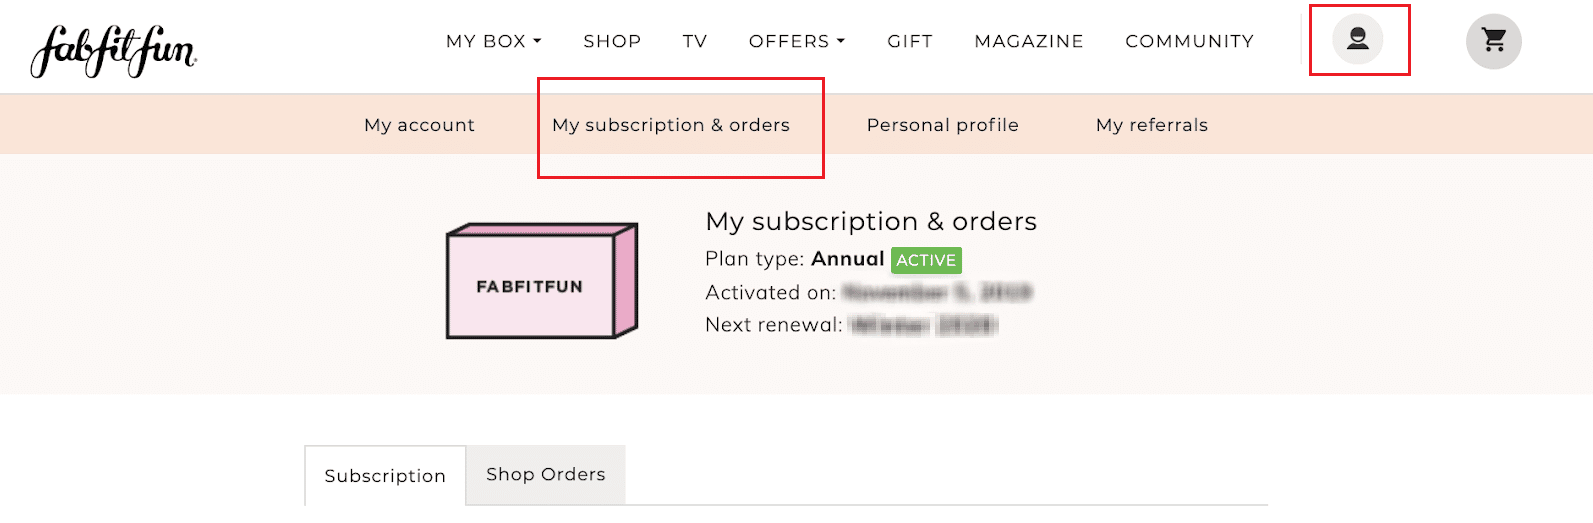 FFF - Profile icon - My subscription & orders